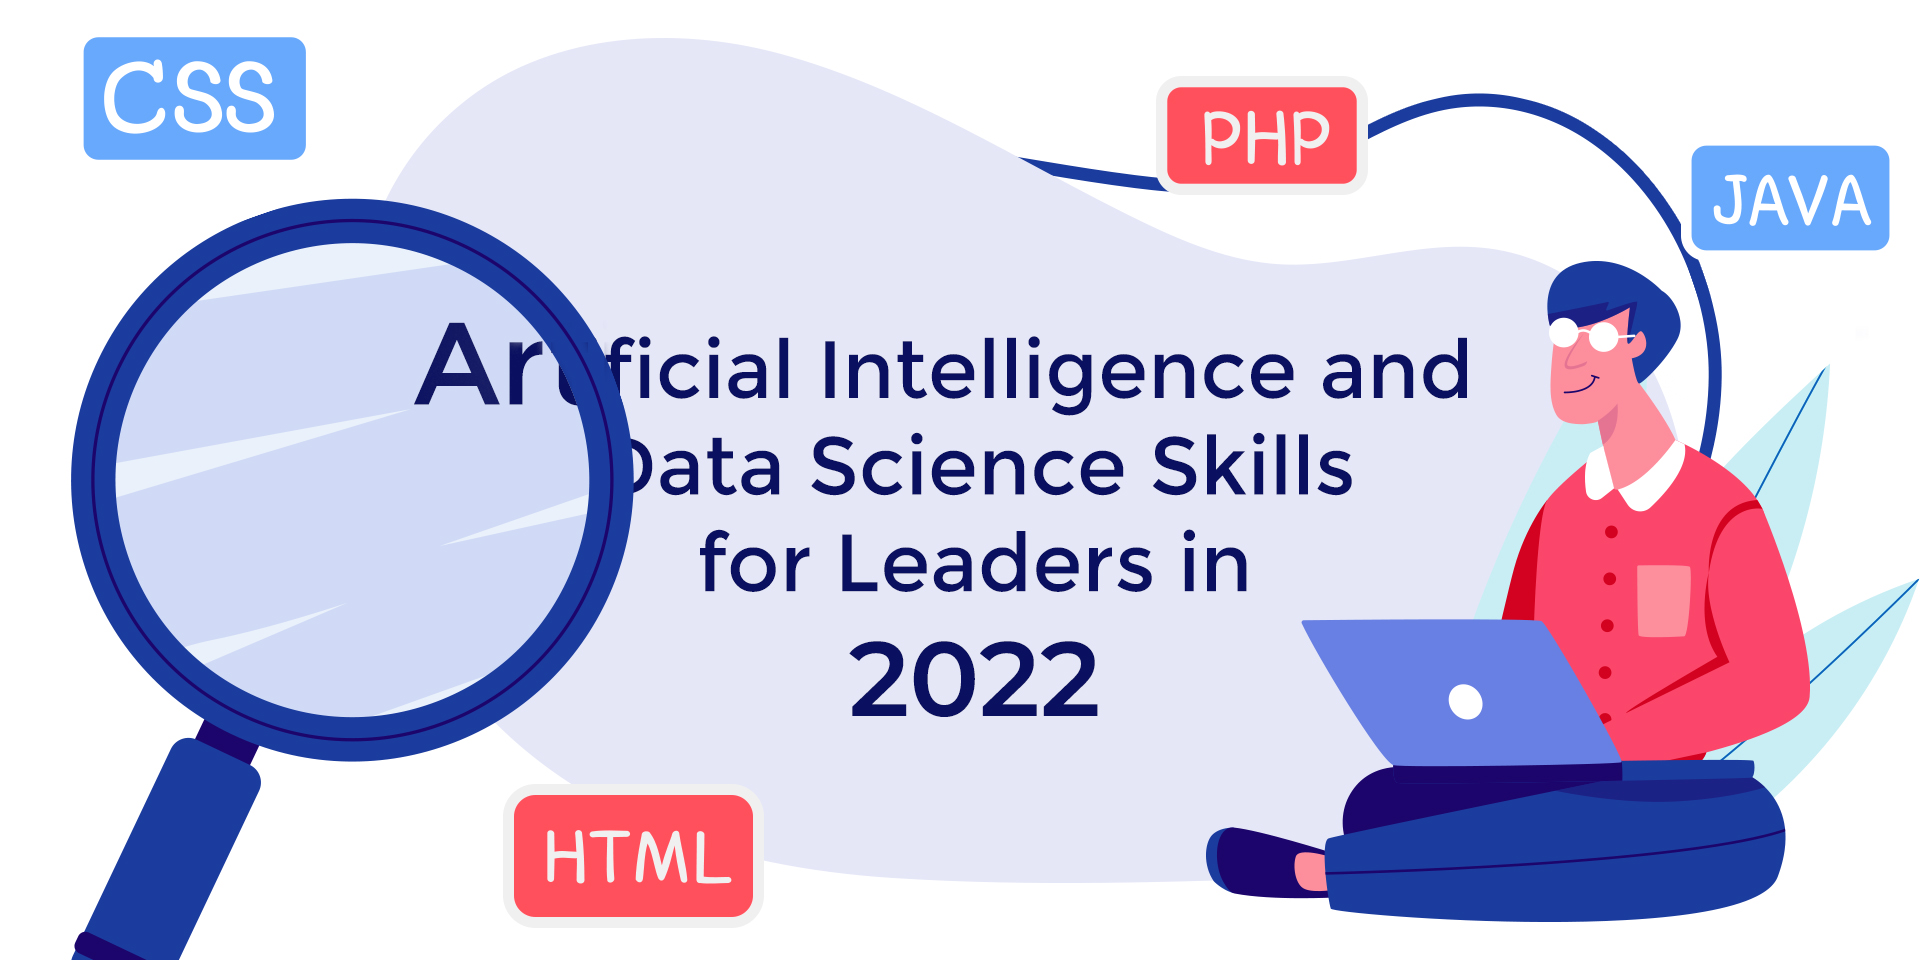 AI in Technology – The Top Skills in Artificial Intelligence and Data Science for Leaders in the IT Industry